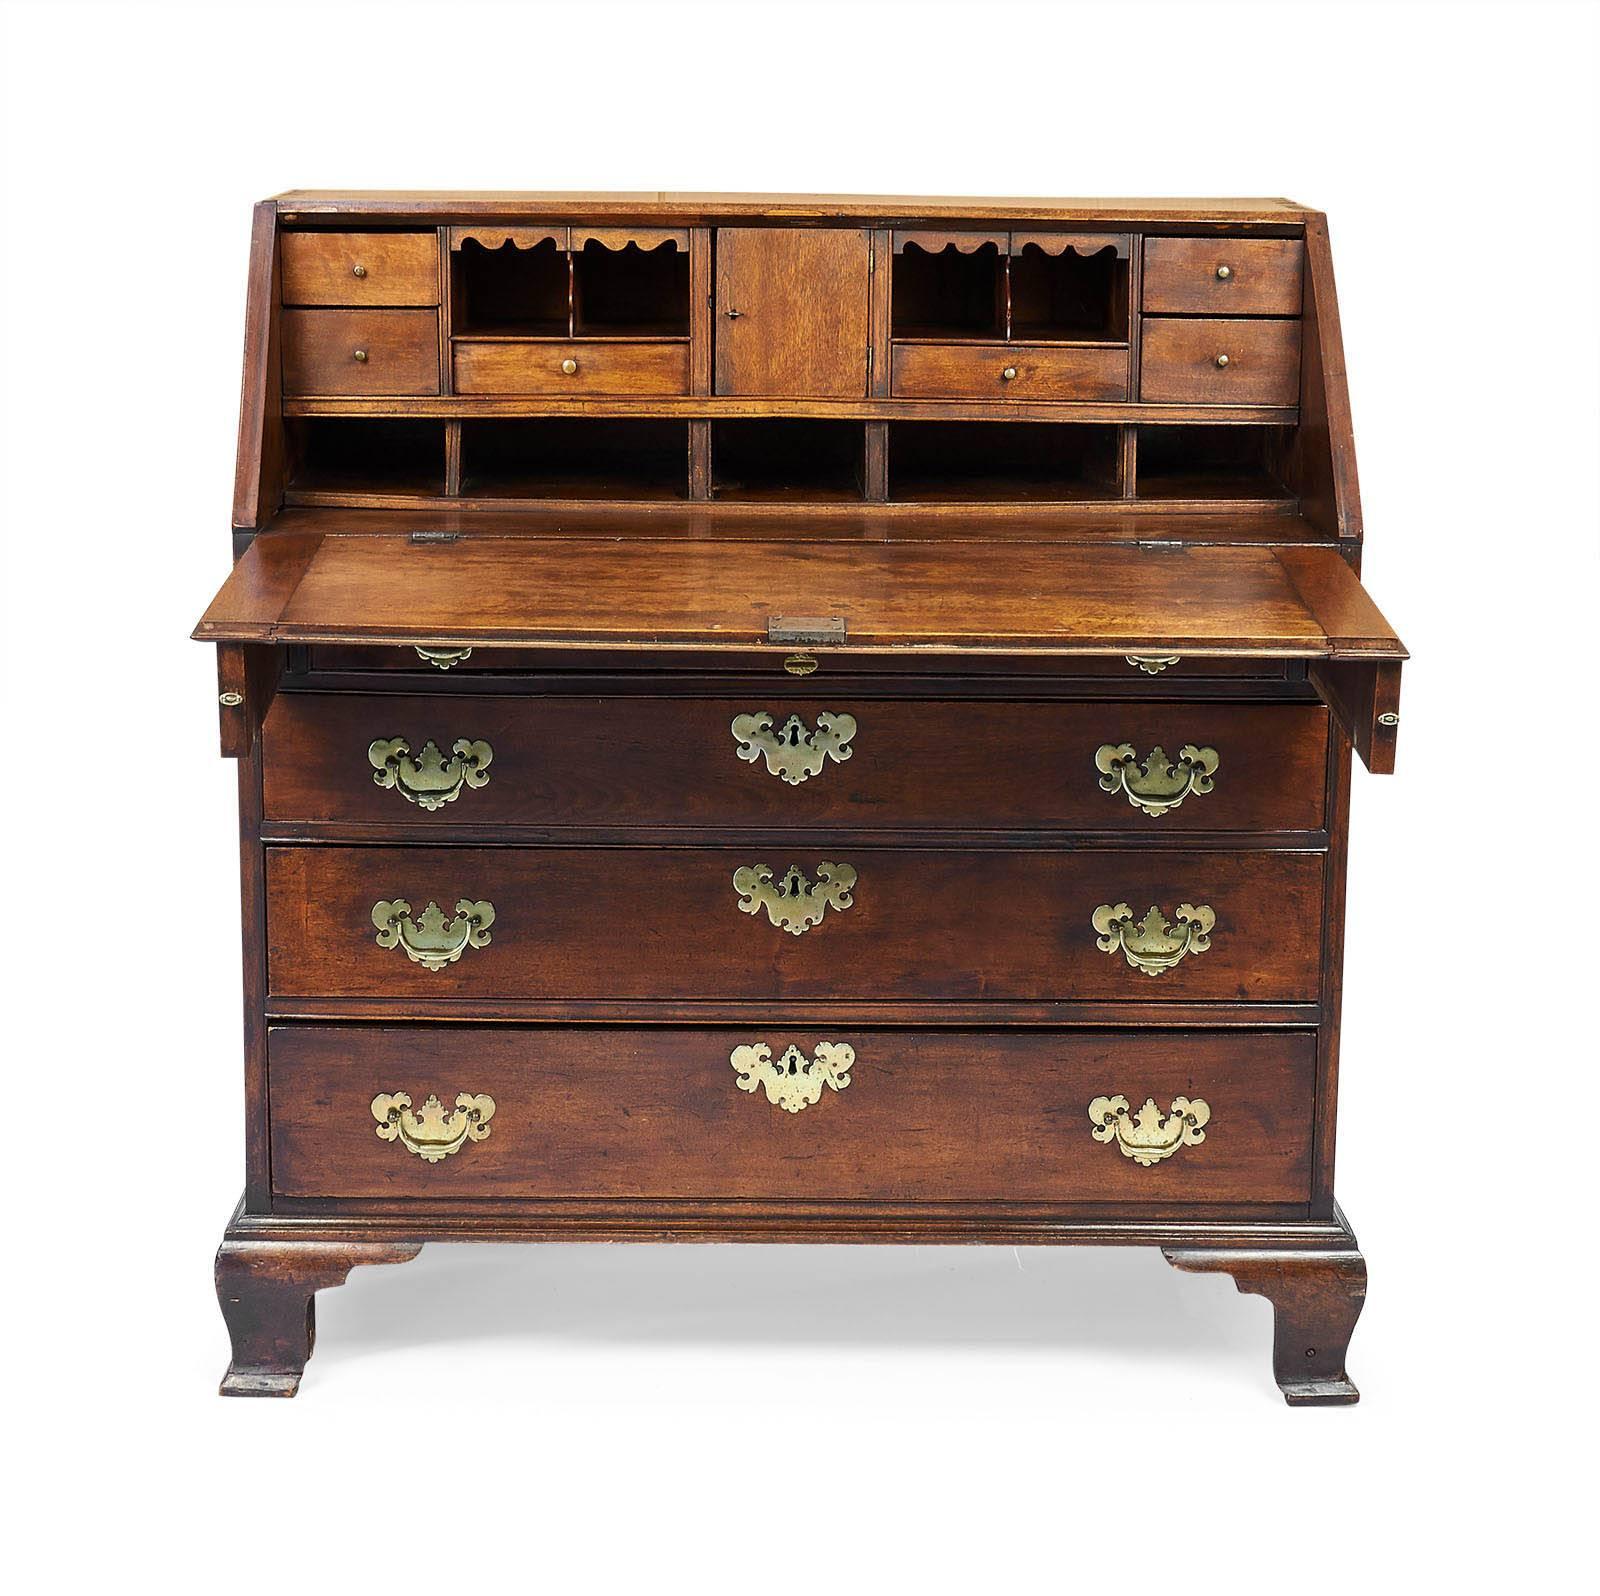 A nice old American Chippendale slant front desk made in New England during the last quarter of the 18th century.  With graduated drawers, what appears to be original finish and well shaped ogee bracket feet.  The brasses are not original but the